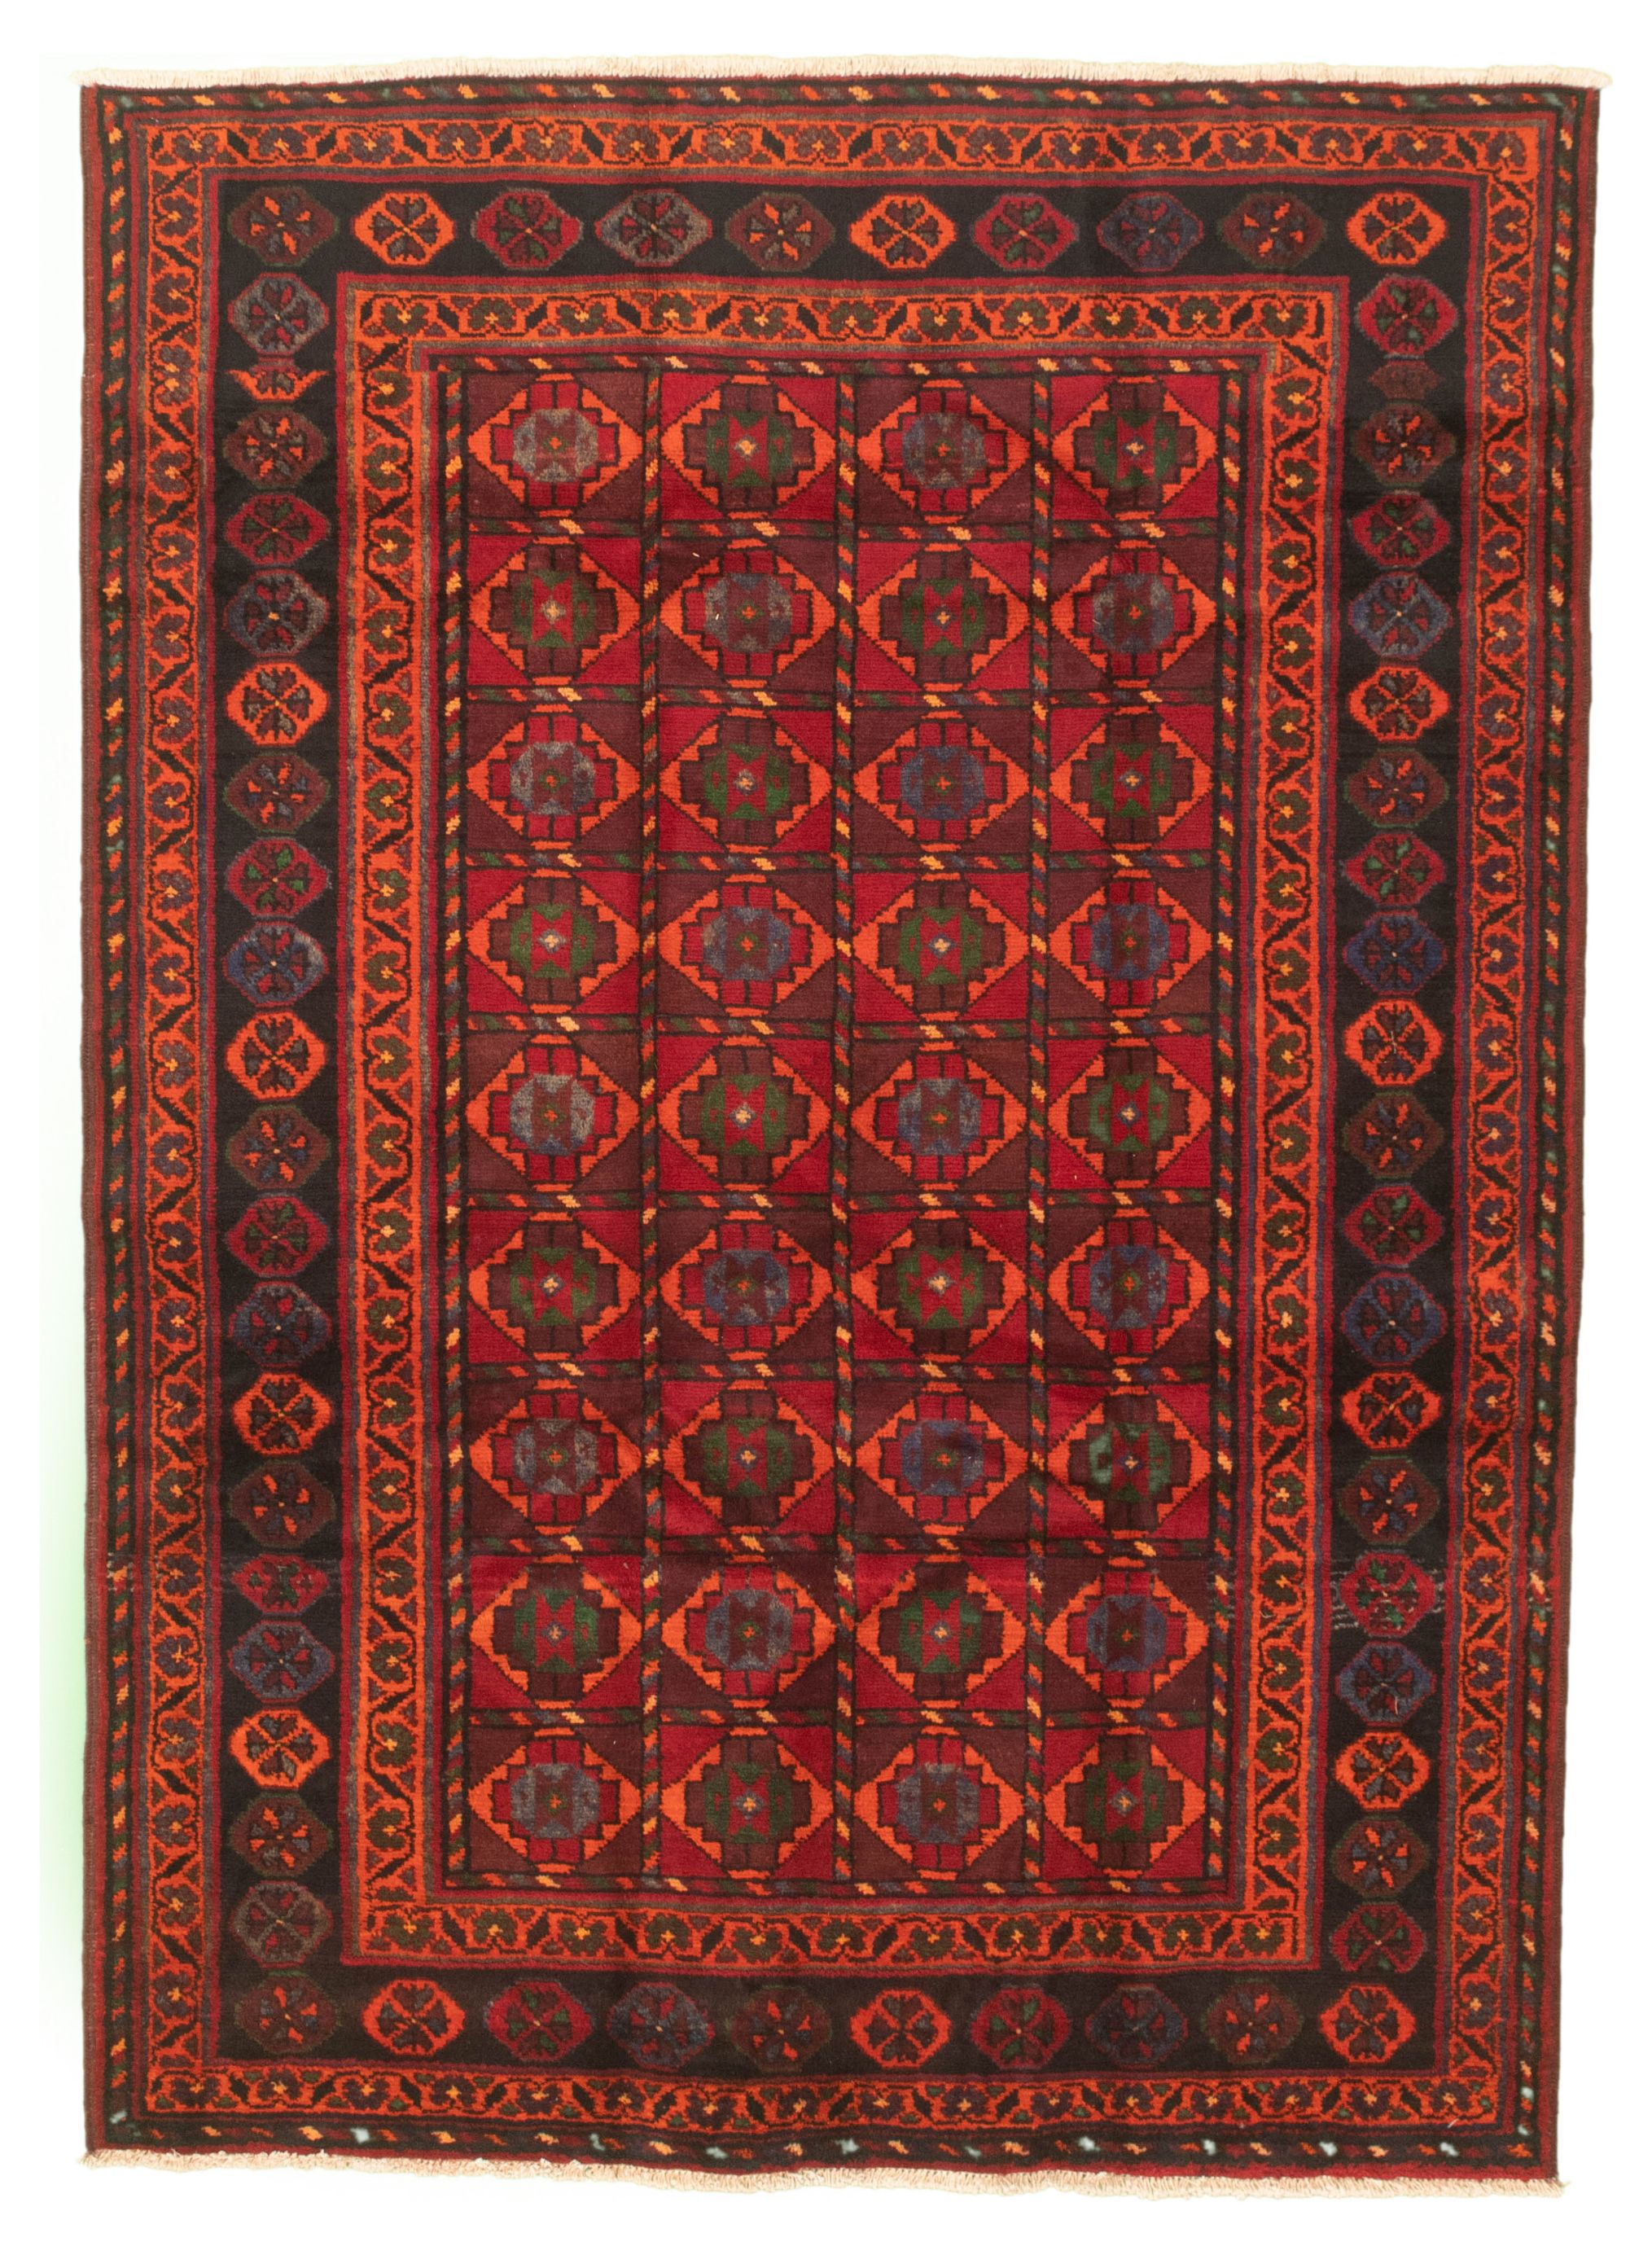 Hand-knotted Authentic Turkish Red Wool Rug 5'1" x 7'3"  Size: 5'1" x 7'3"  